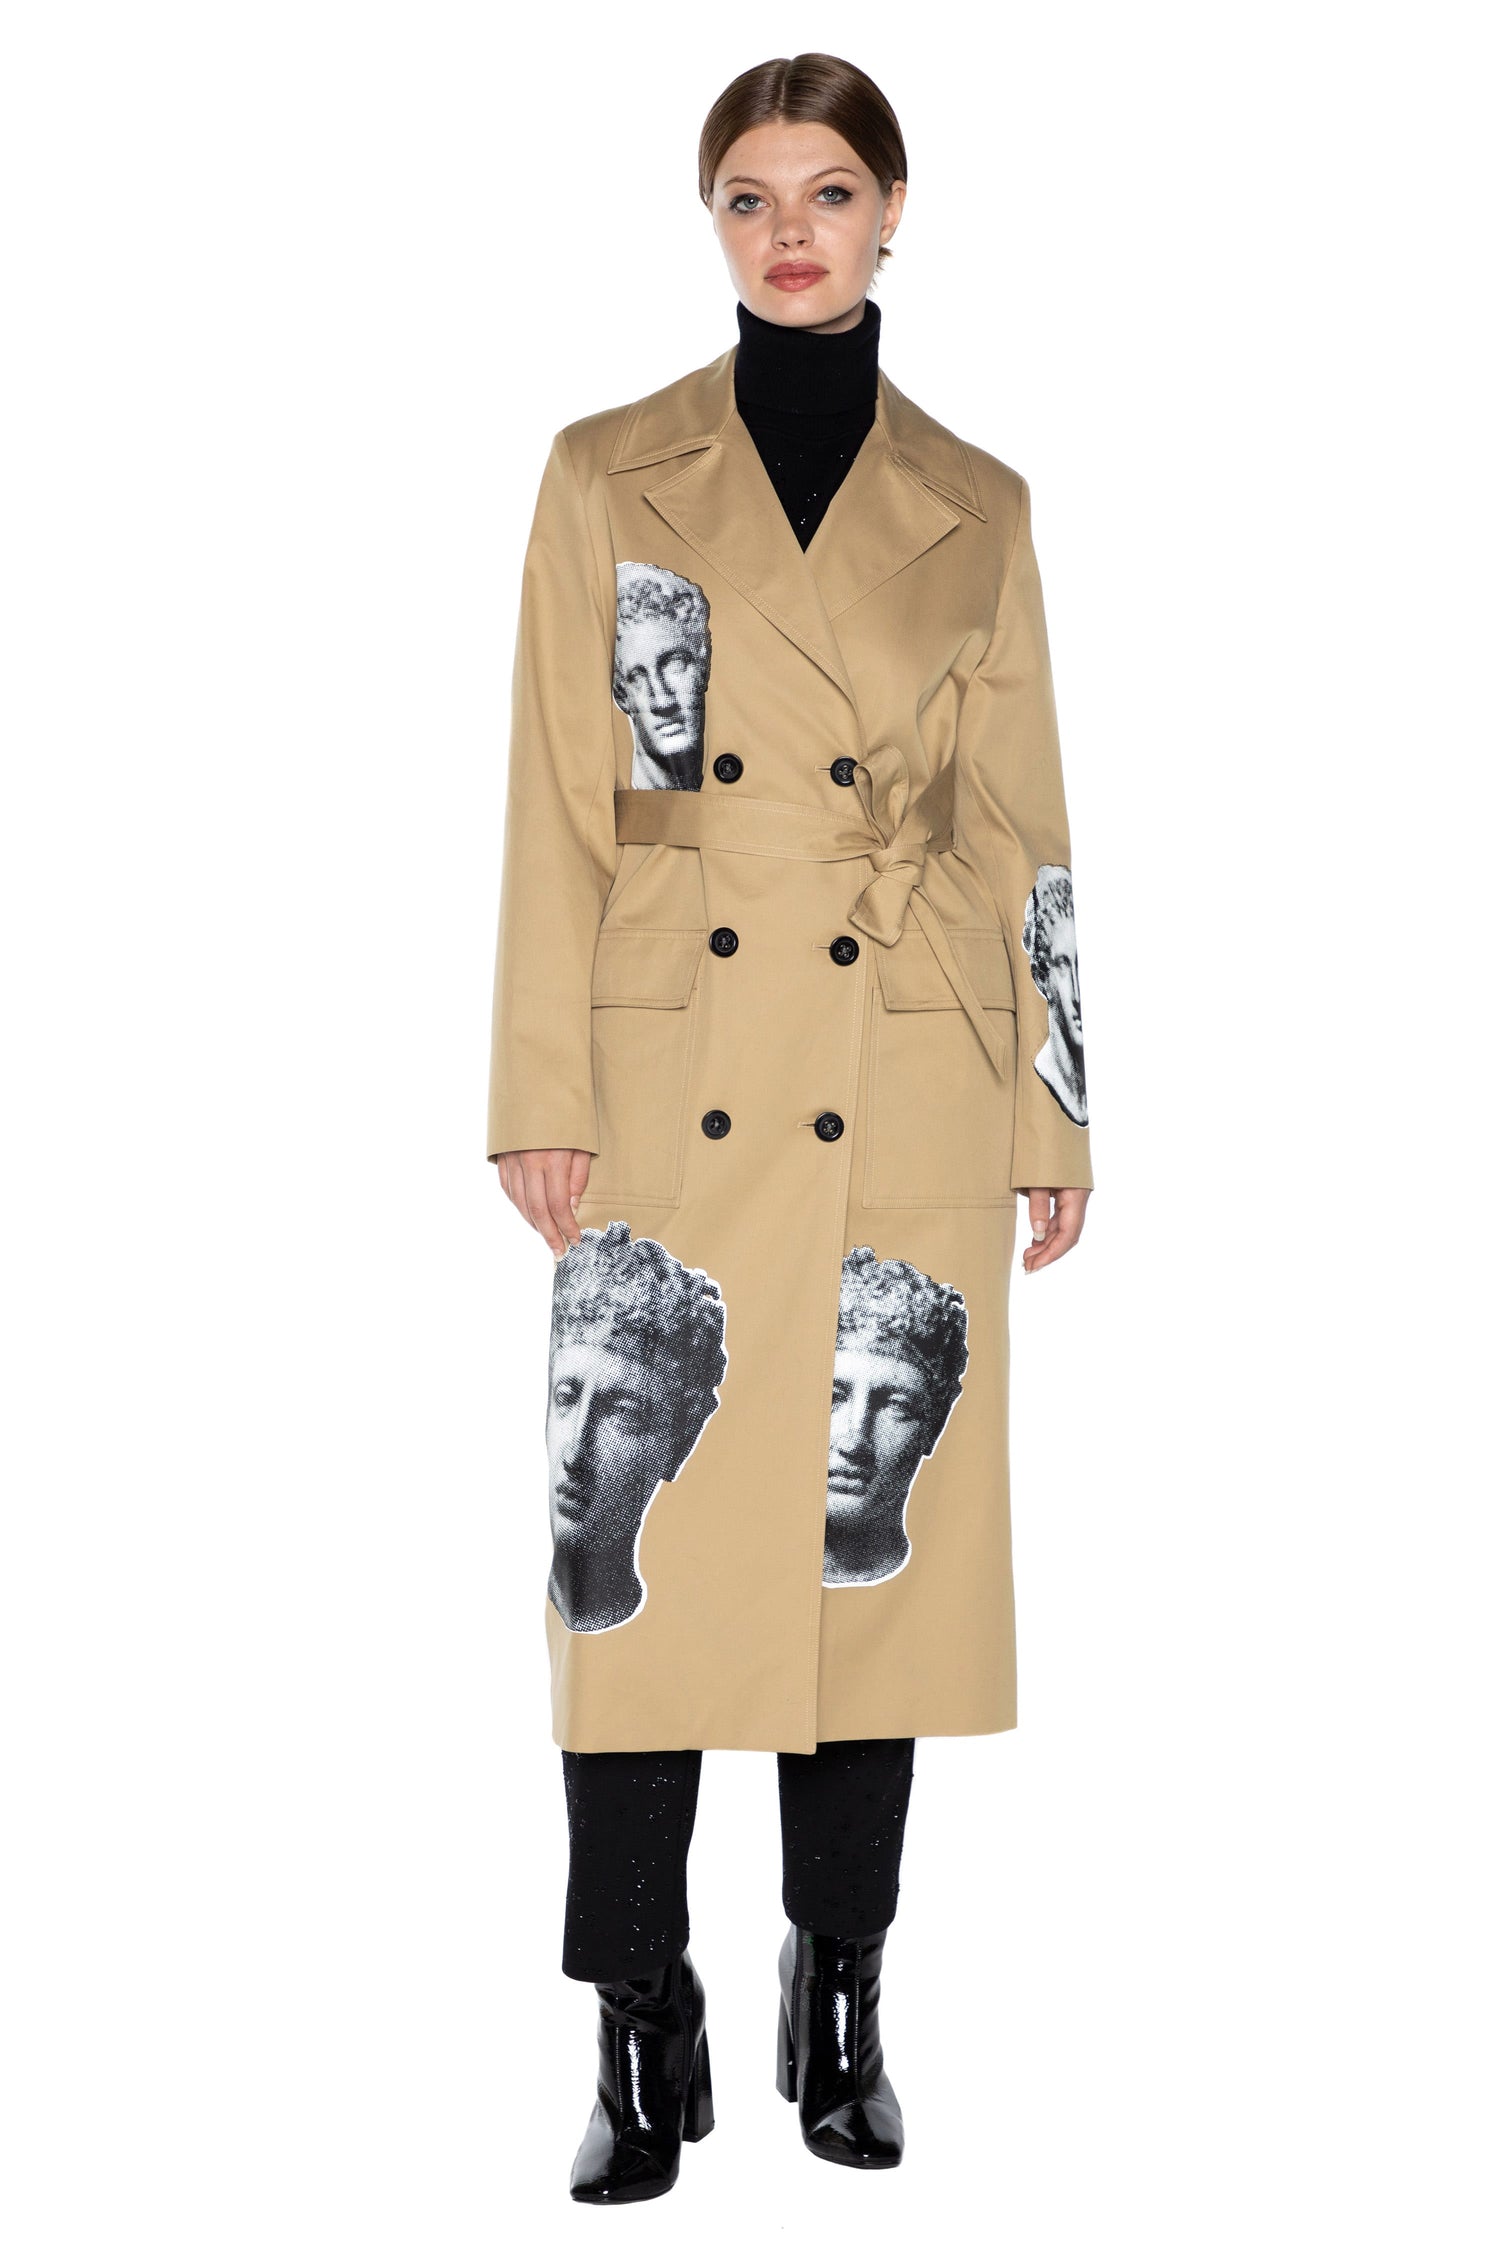 'CUPID AND PSYCHE' LONG LEAN TRENCH -  - Libertine